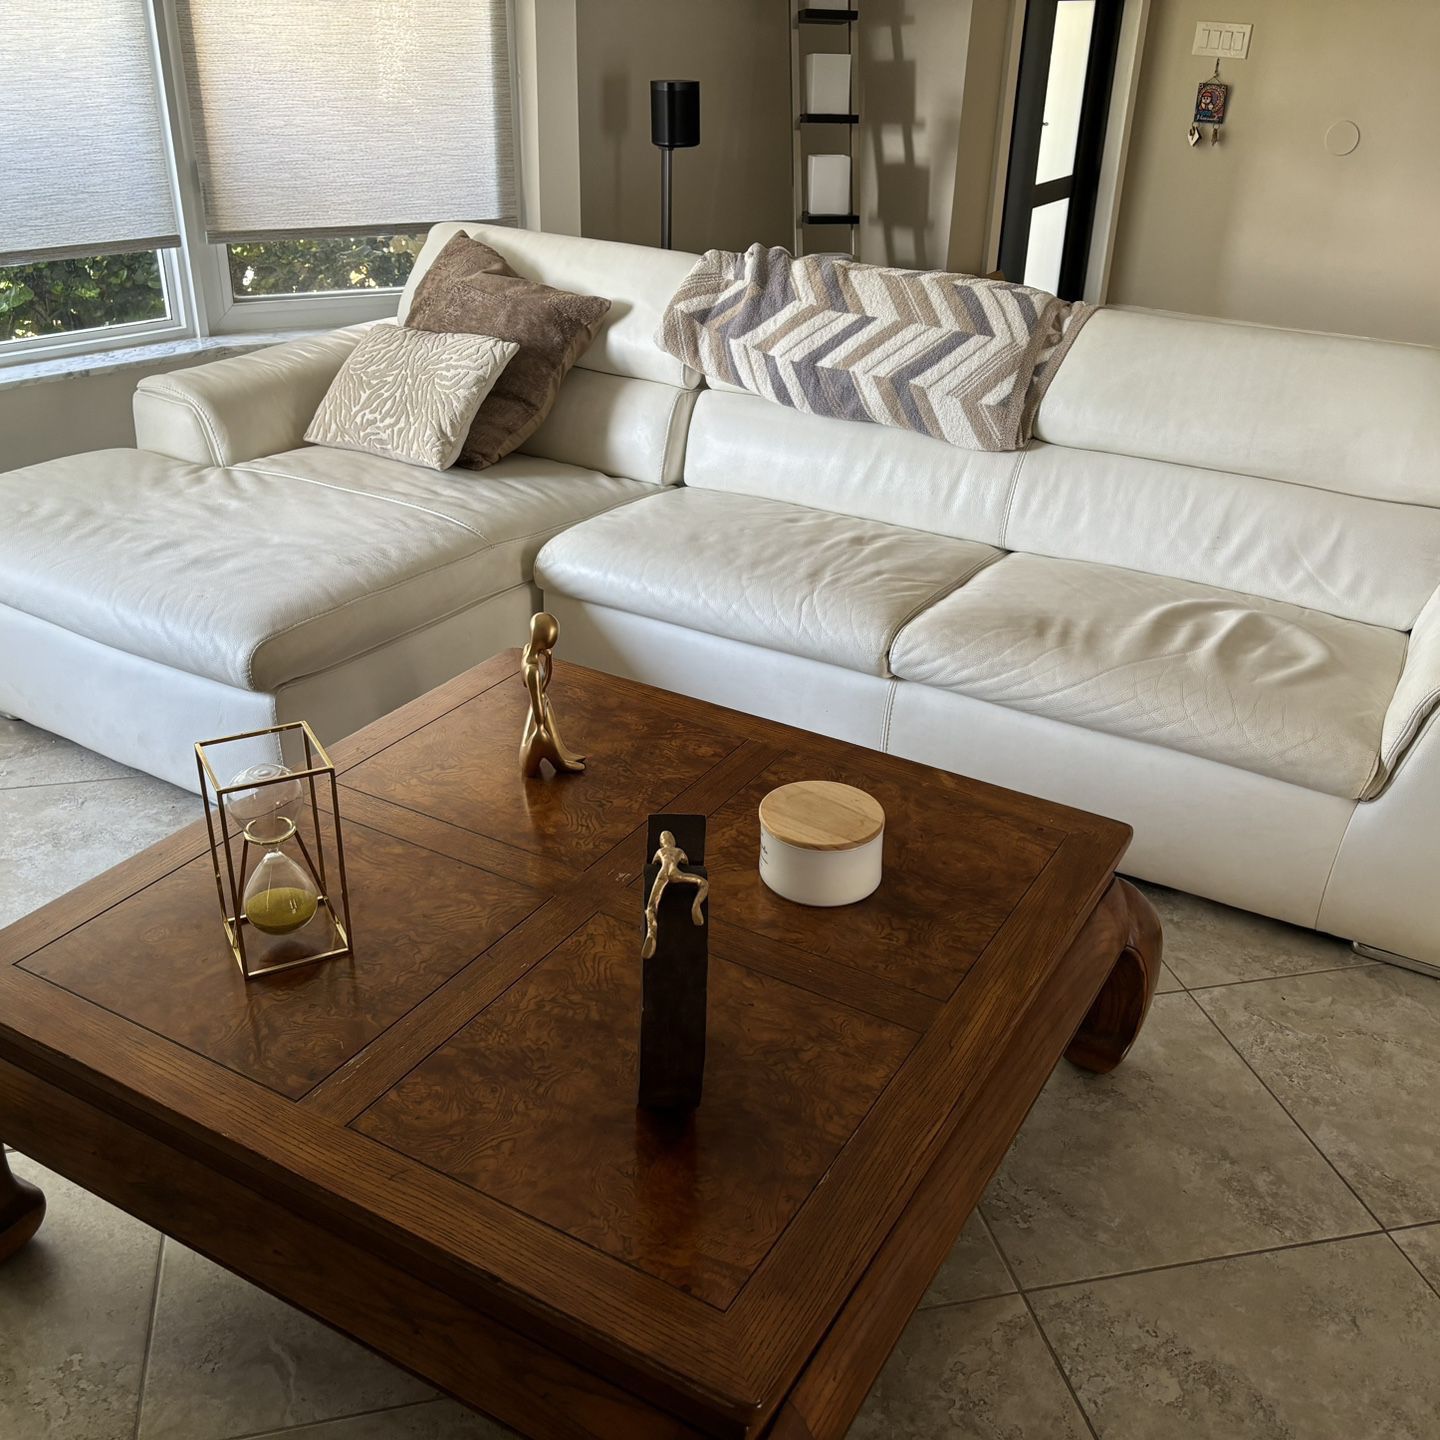 Chinese Coffee Table/ White Leather Sectional 